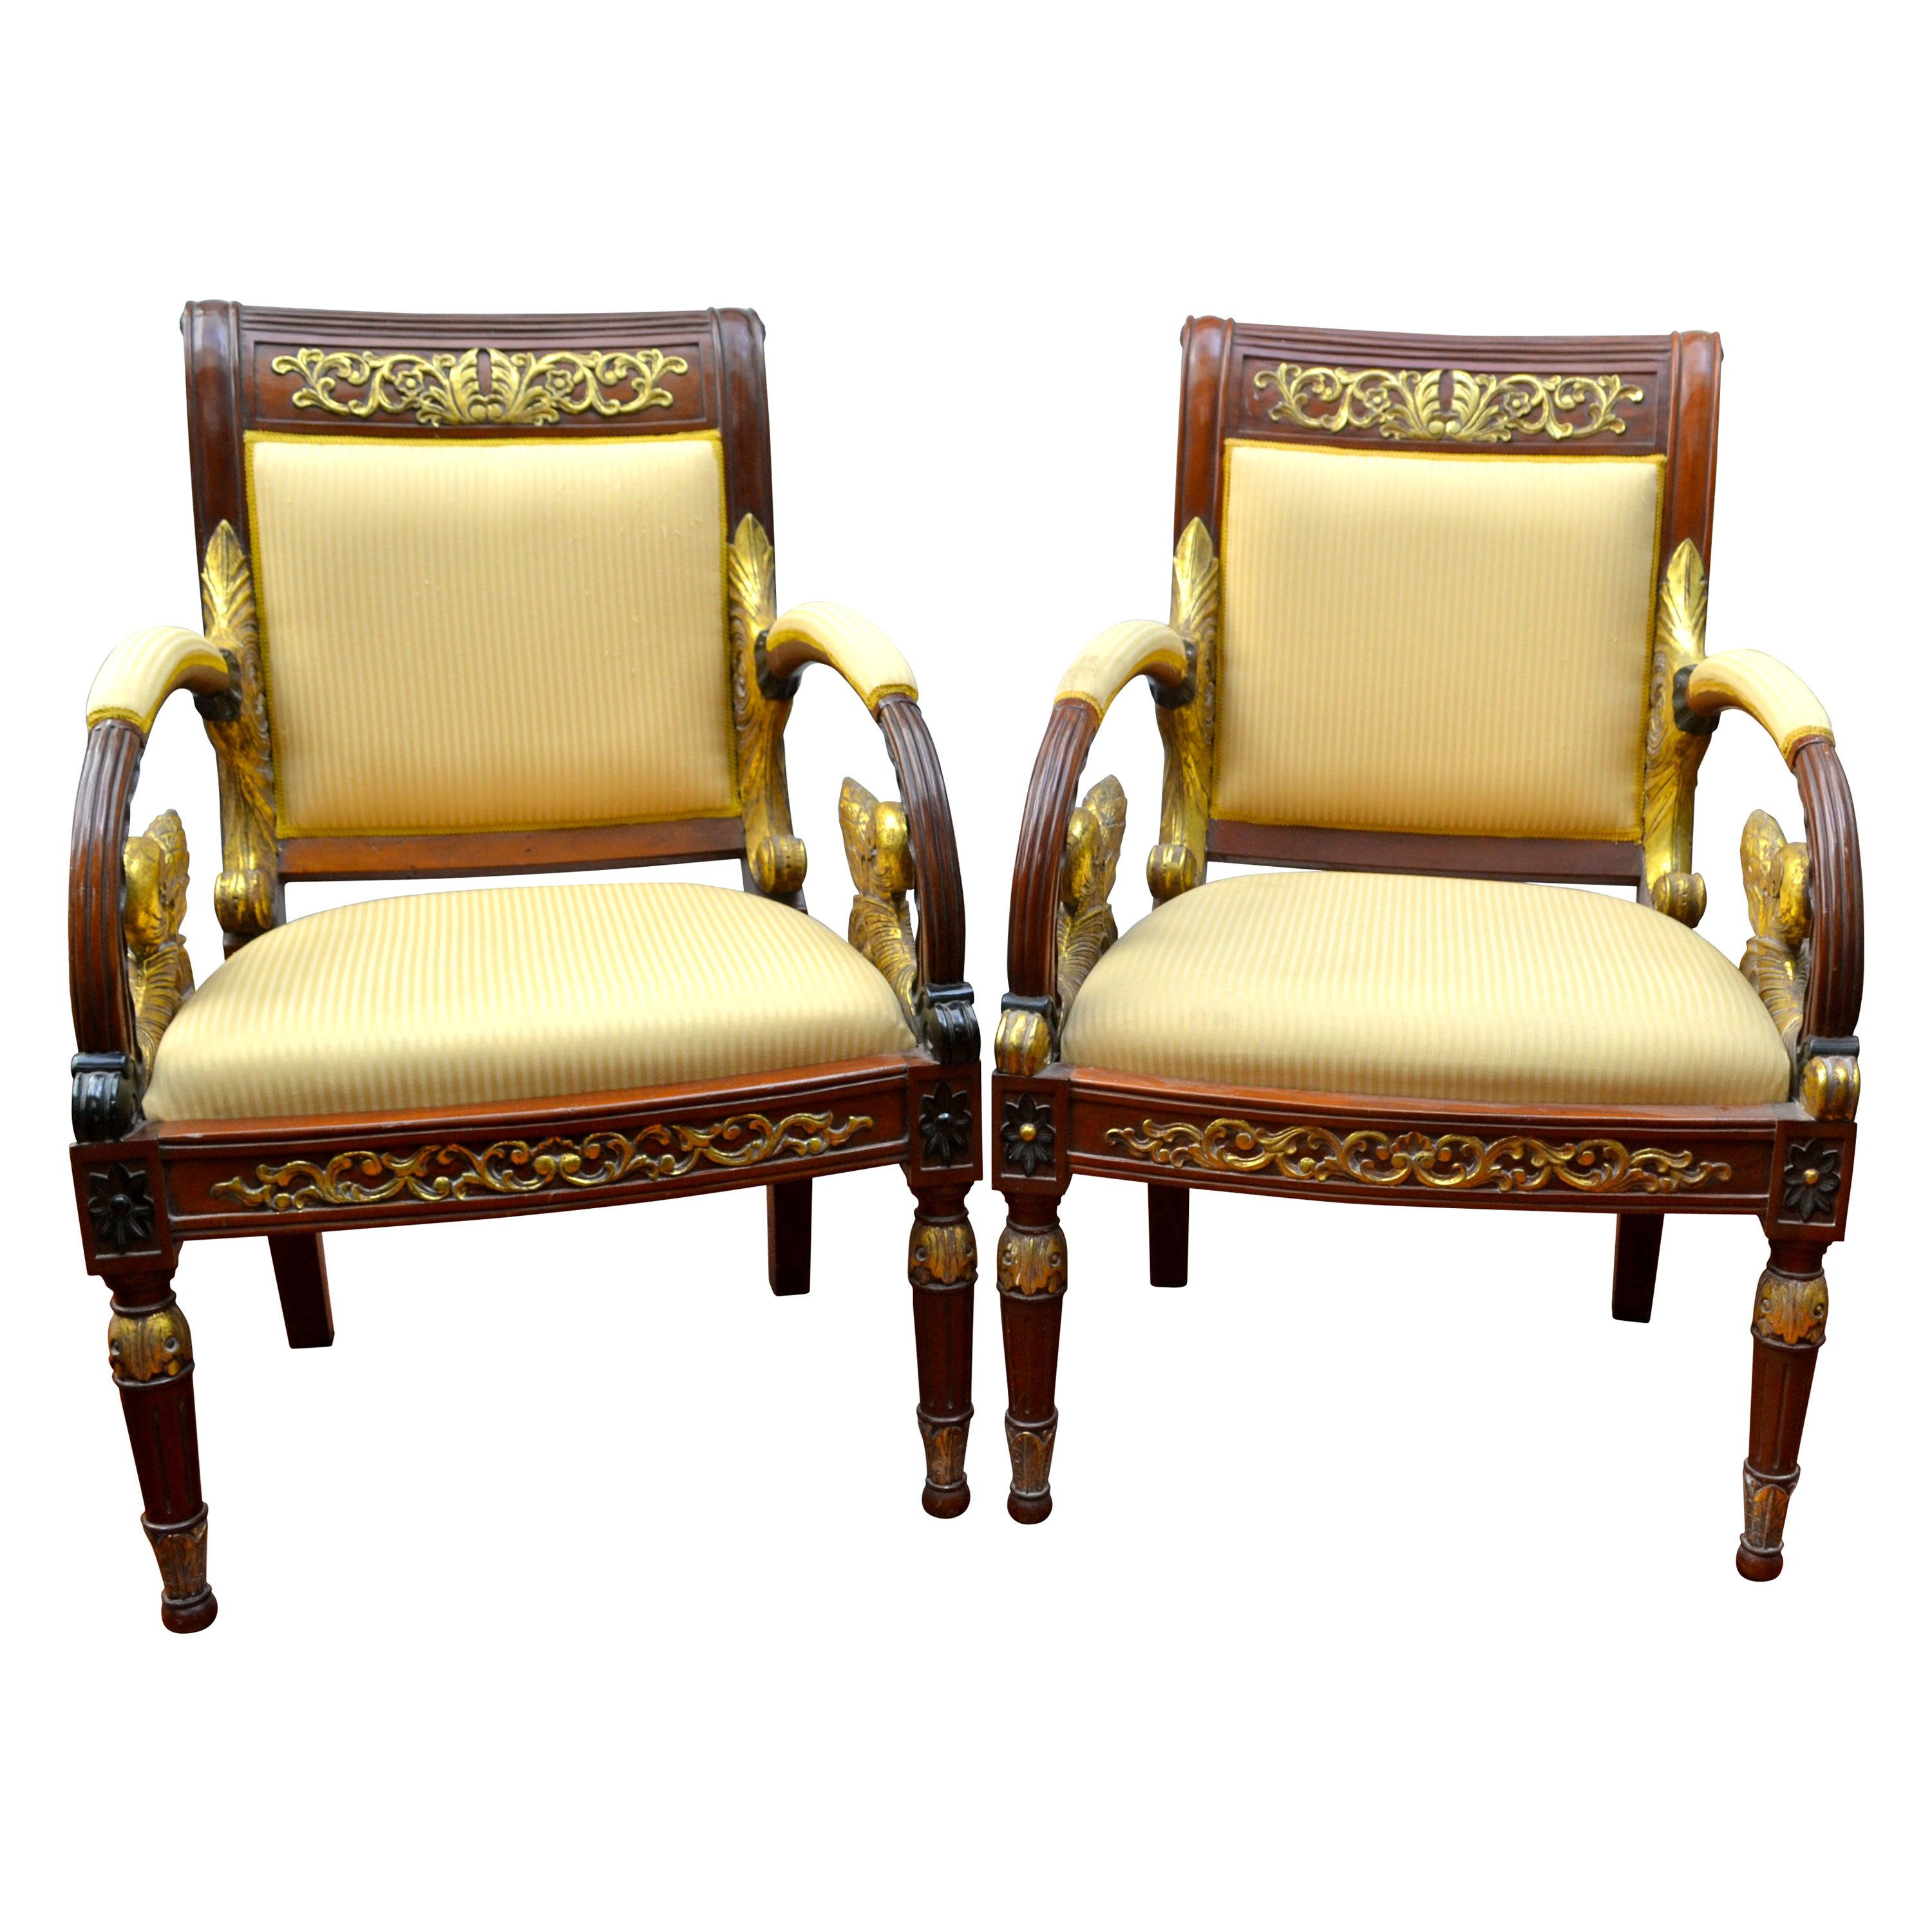 A rare pair of elegant and unique mahogany and gilt armchairs designed by Gianni Versace, part of the 1994 Vanitas Furniture collection. The front legs have columnar shaping and taper down to the floor. The back legs are gracefully splayed and